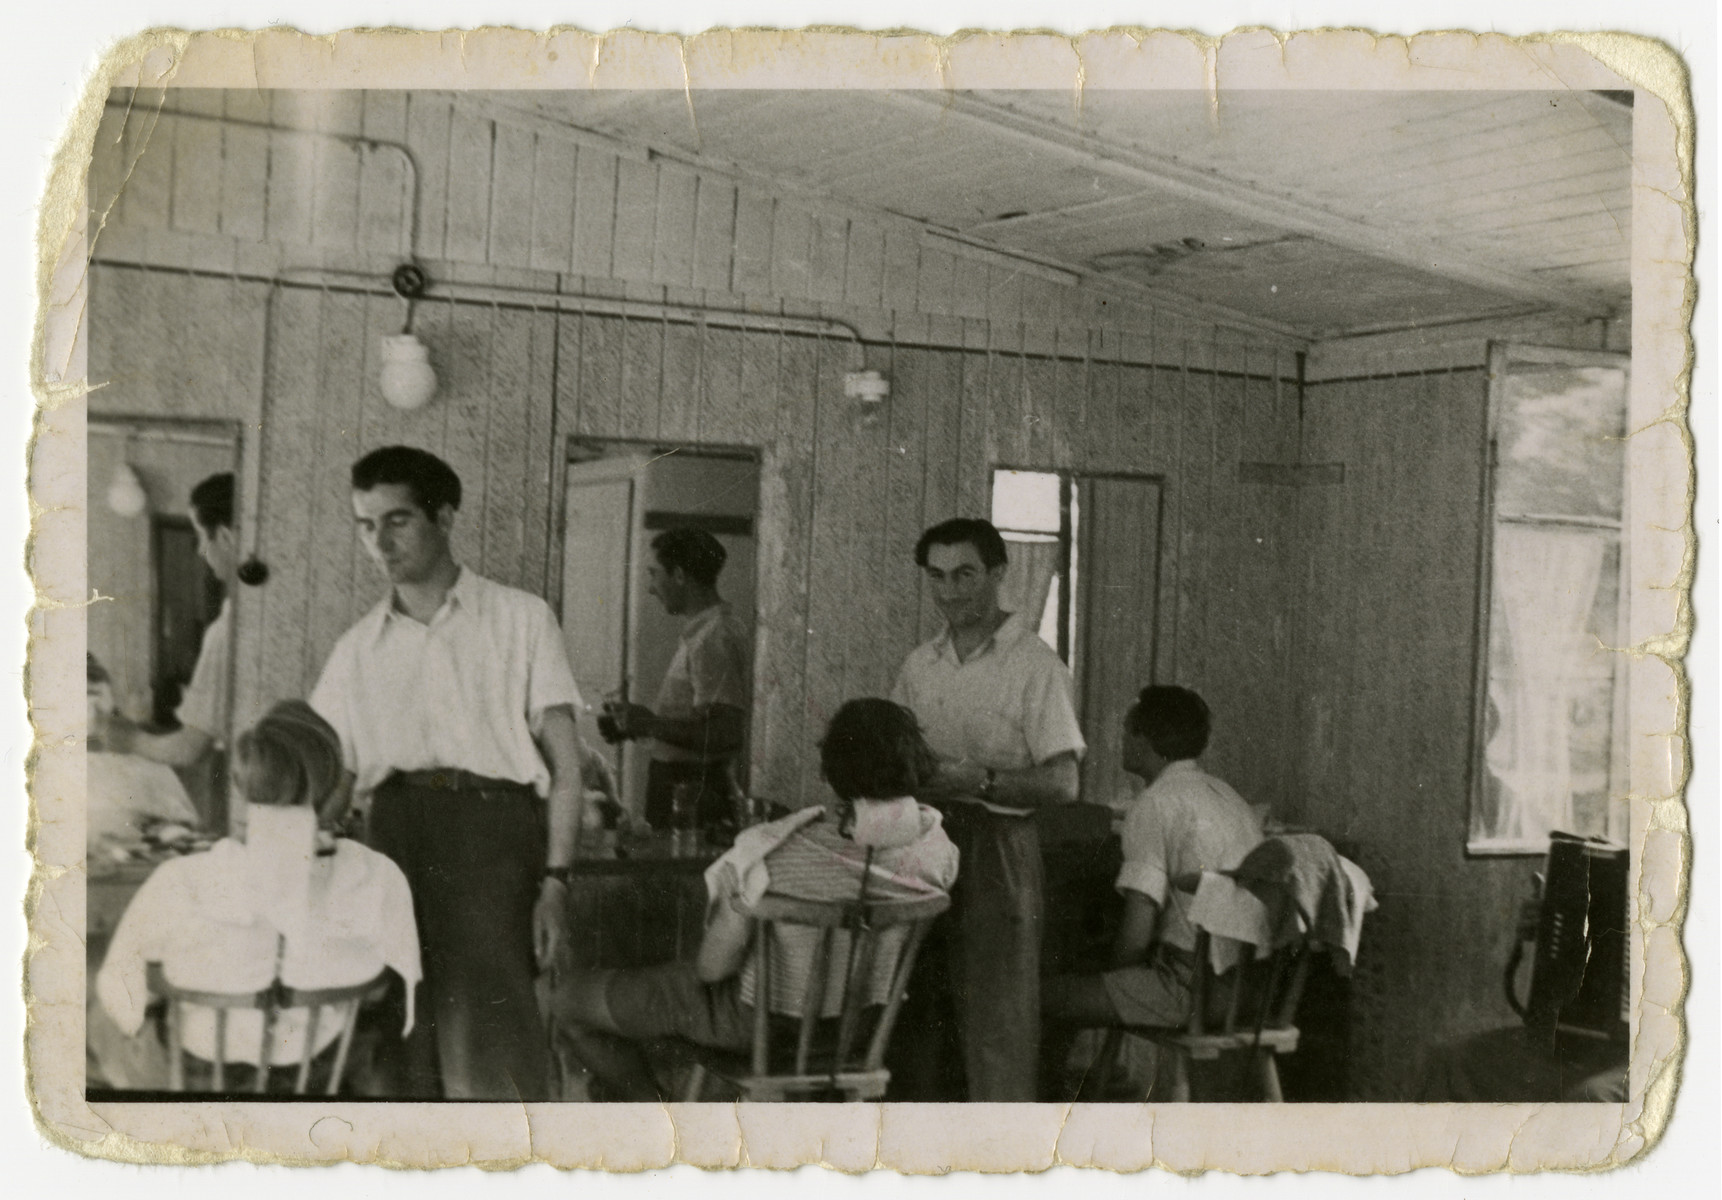 David Burdowski works as a barber [probably in the Feldafing displaced persons camp].

The barber pictured on the left is Chaim (Leo) Goldberg.